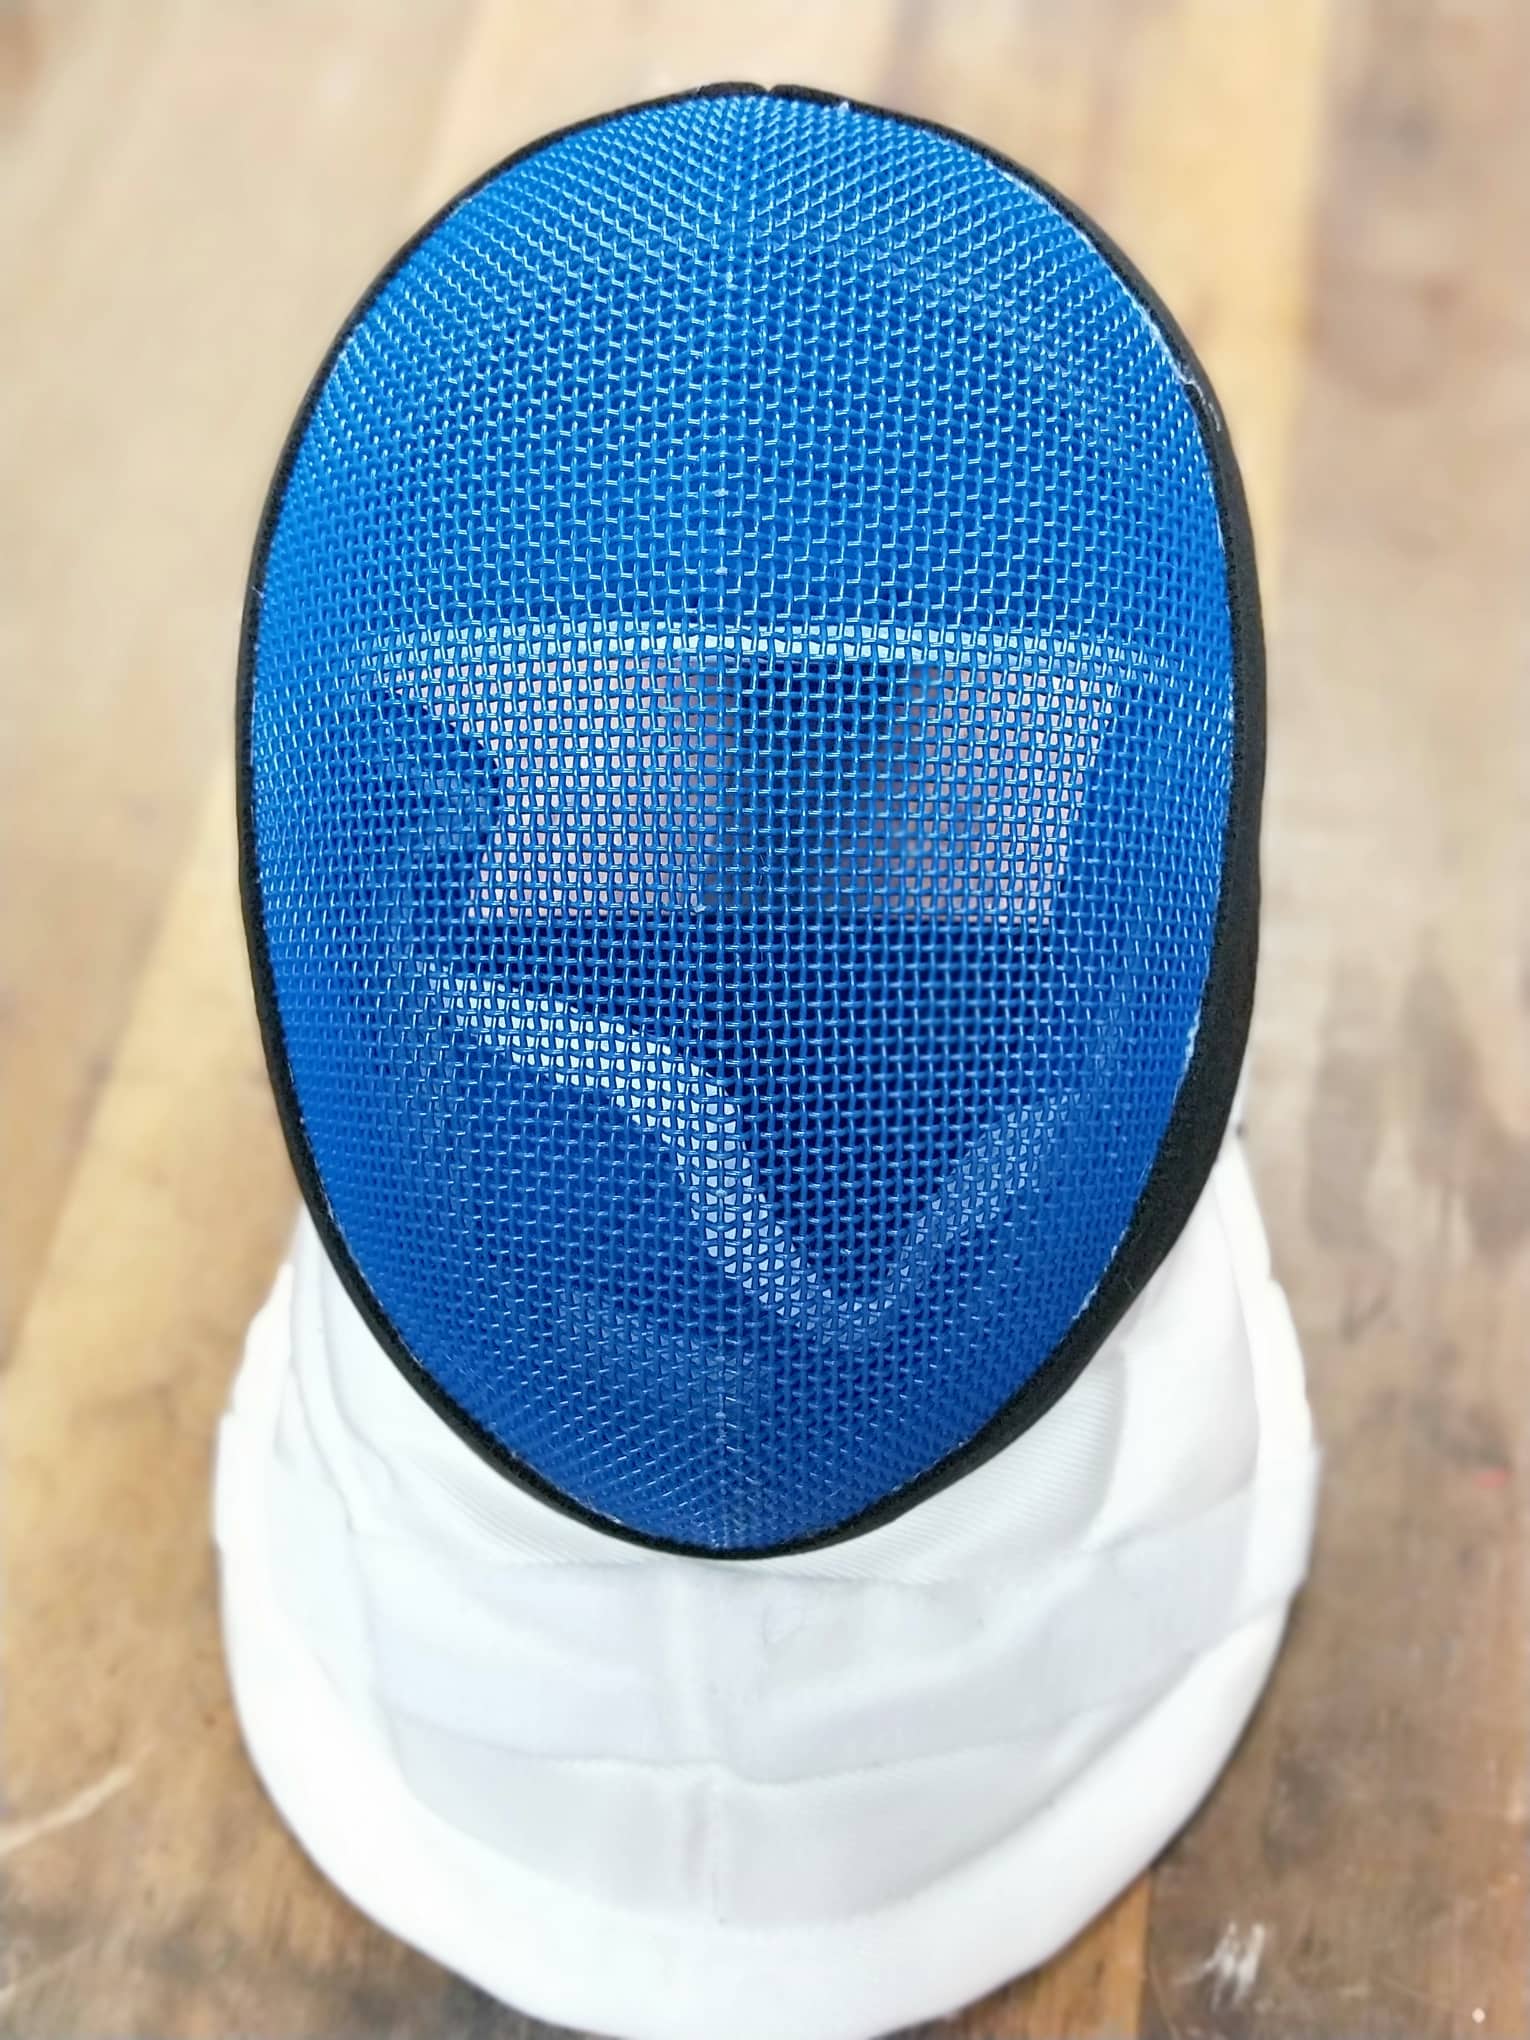 CE 350N Fencing Mask with detachable lining - Click Image to Close